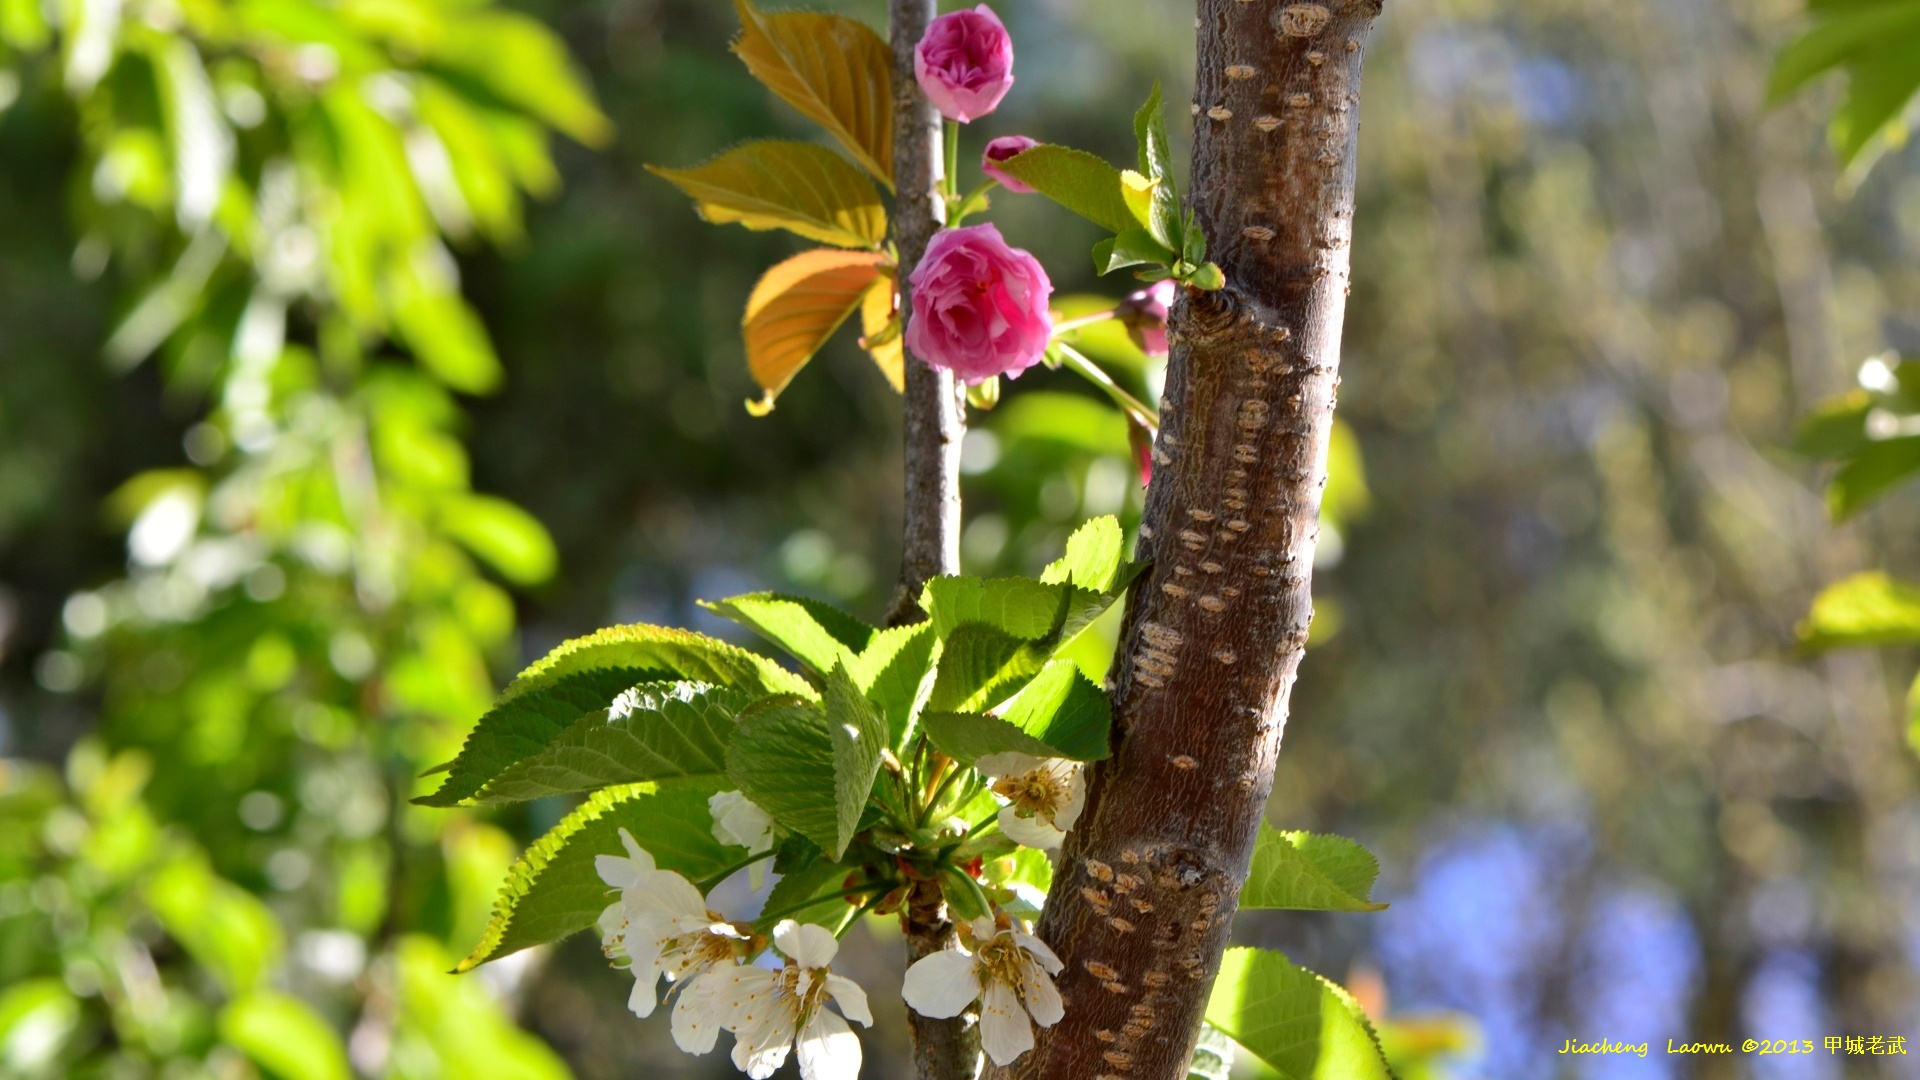 Two flowers in one cherry tree